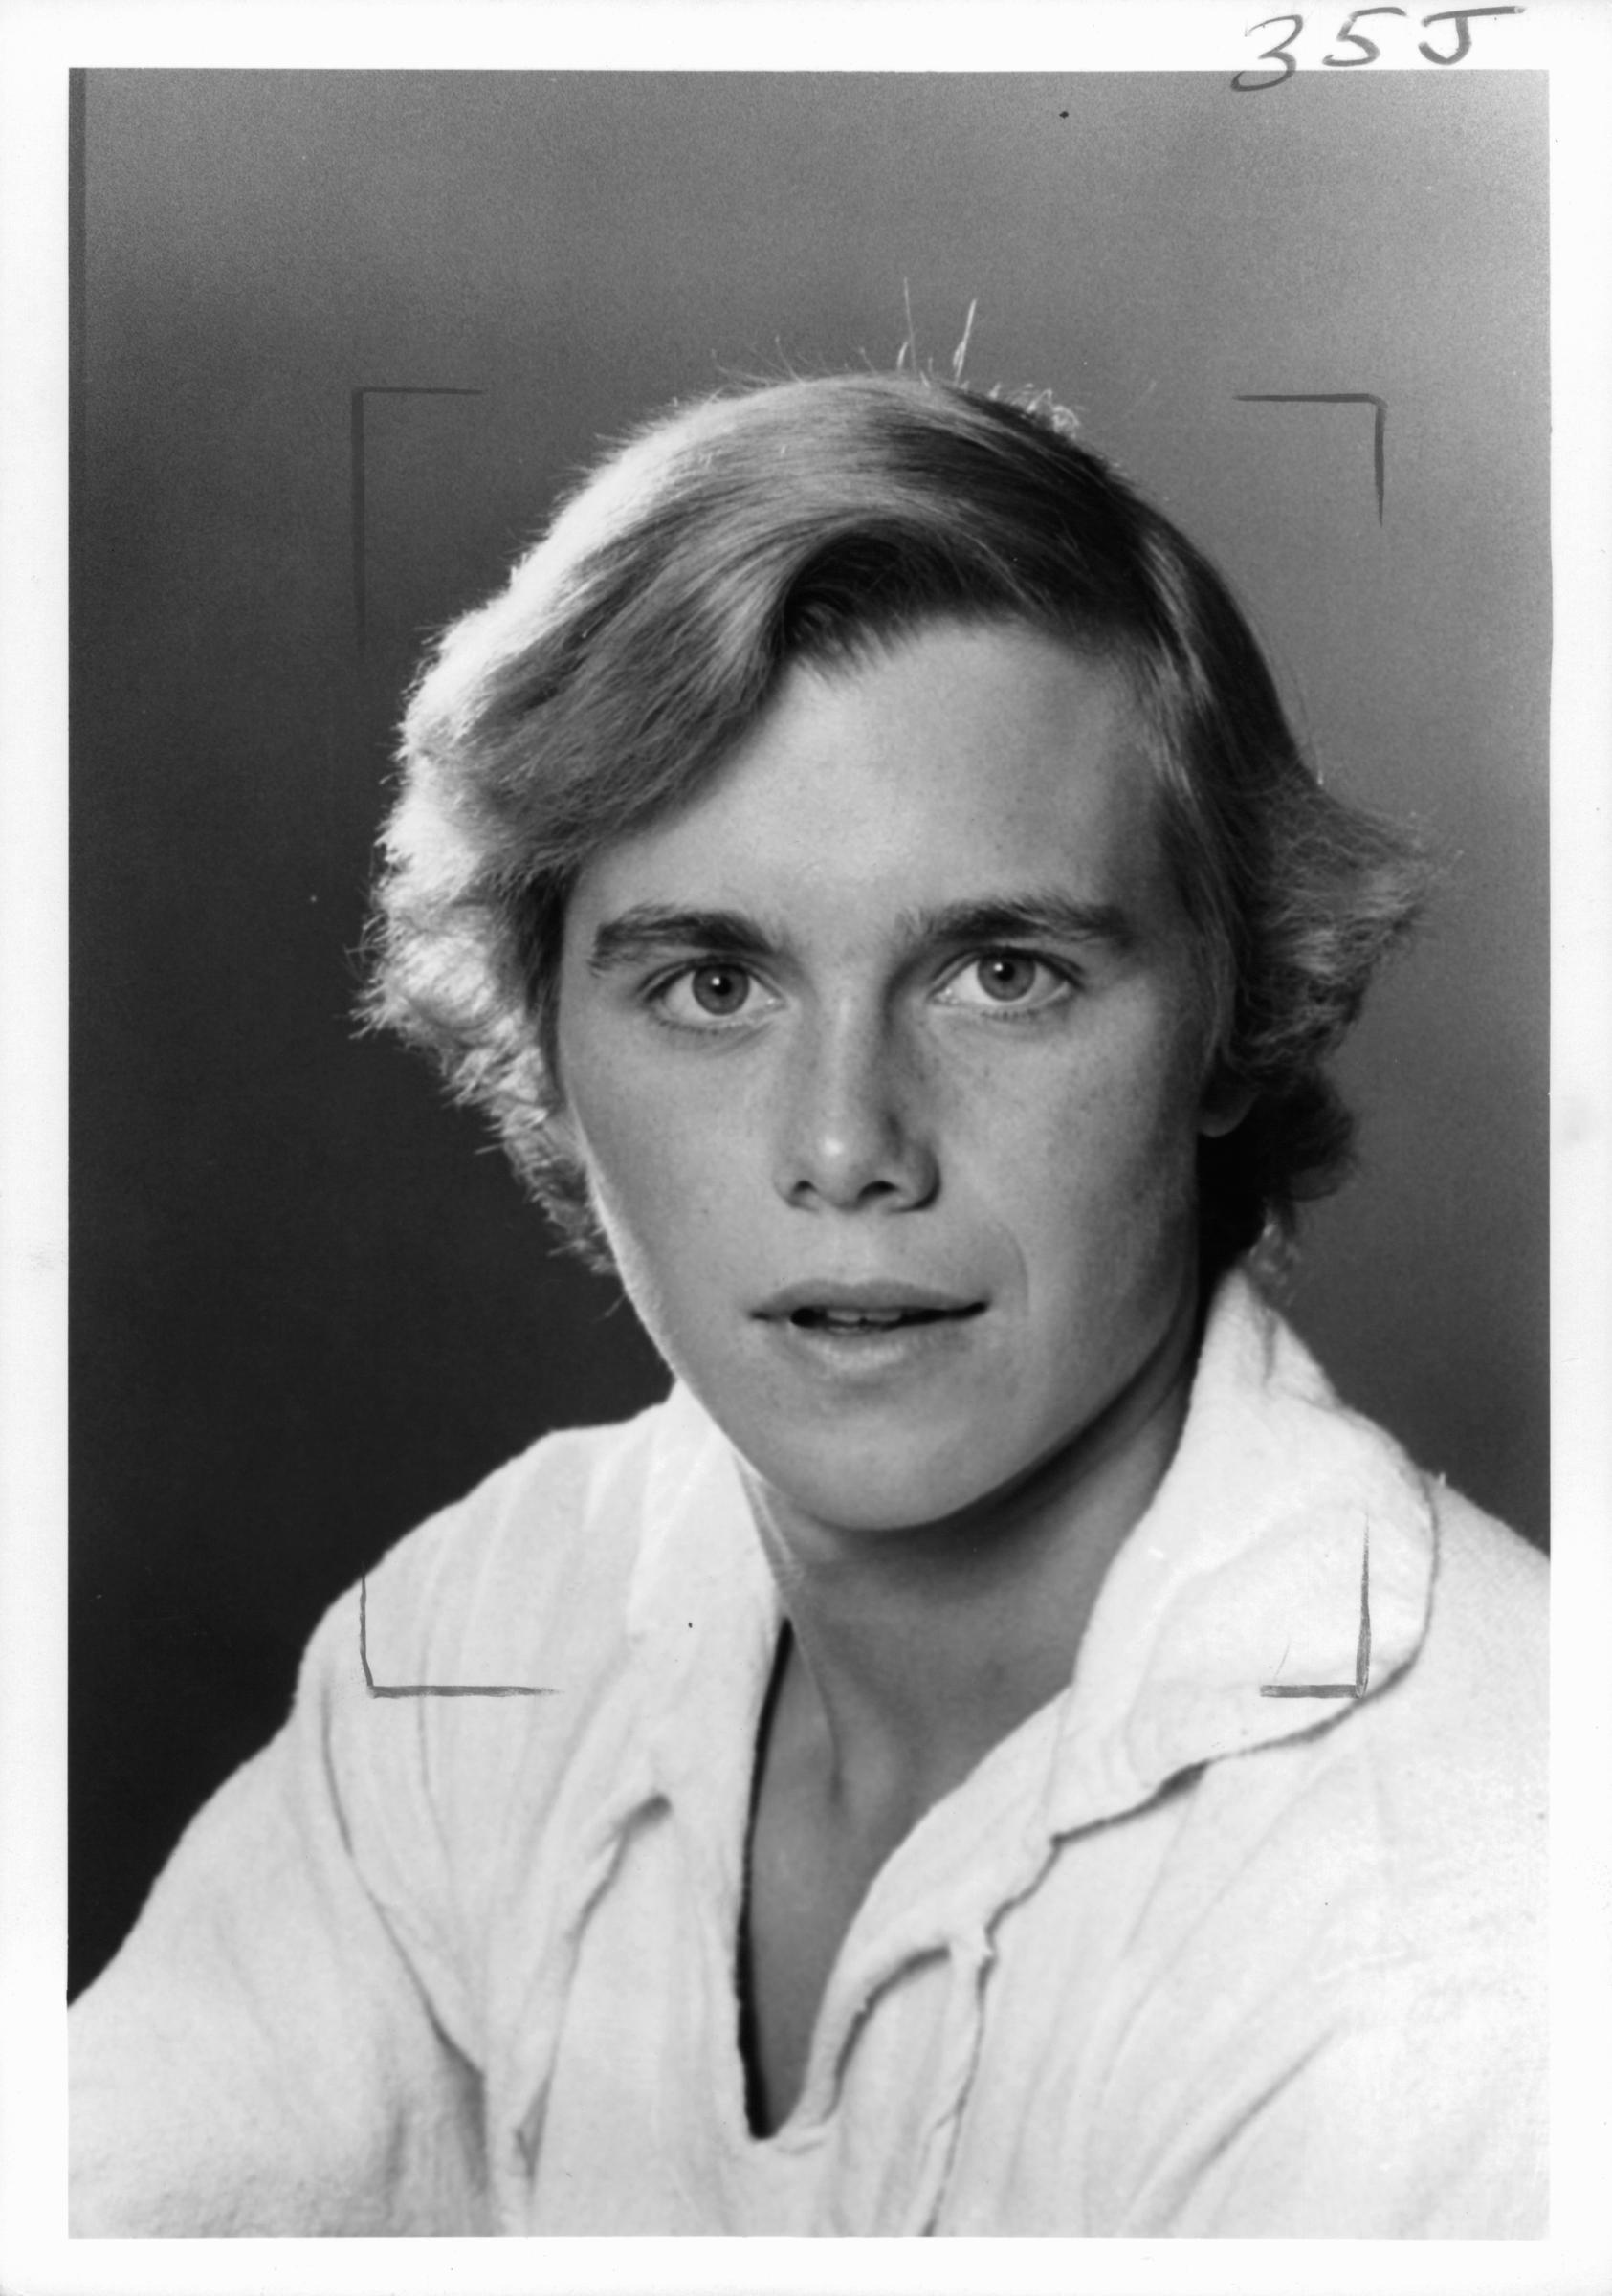 Christopher Atkins, vers 1980. | Source : Getty Images